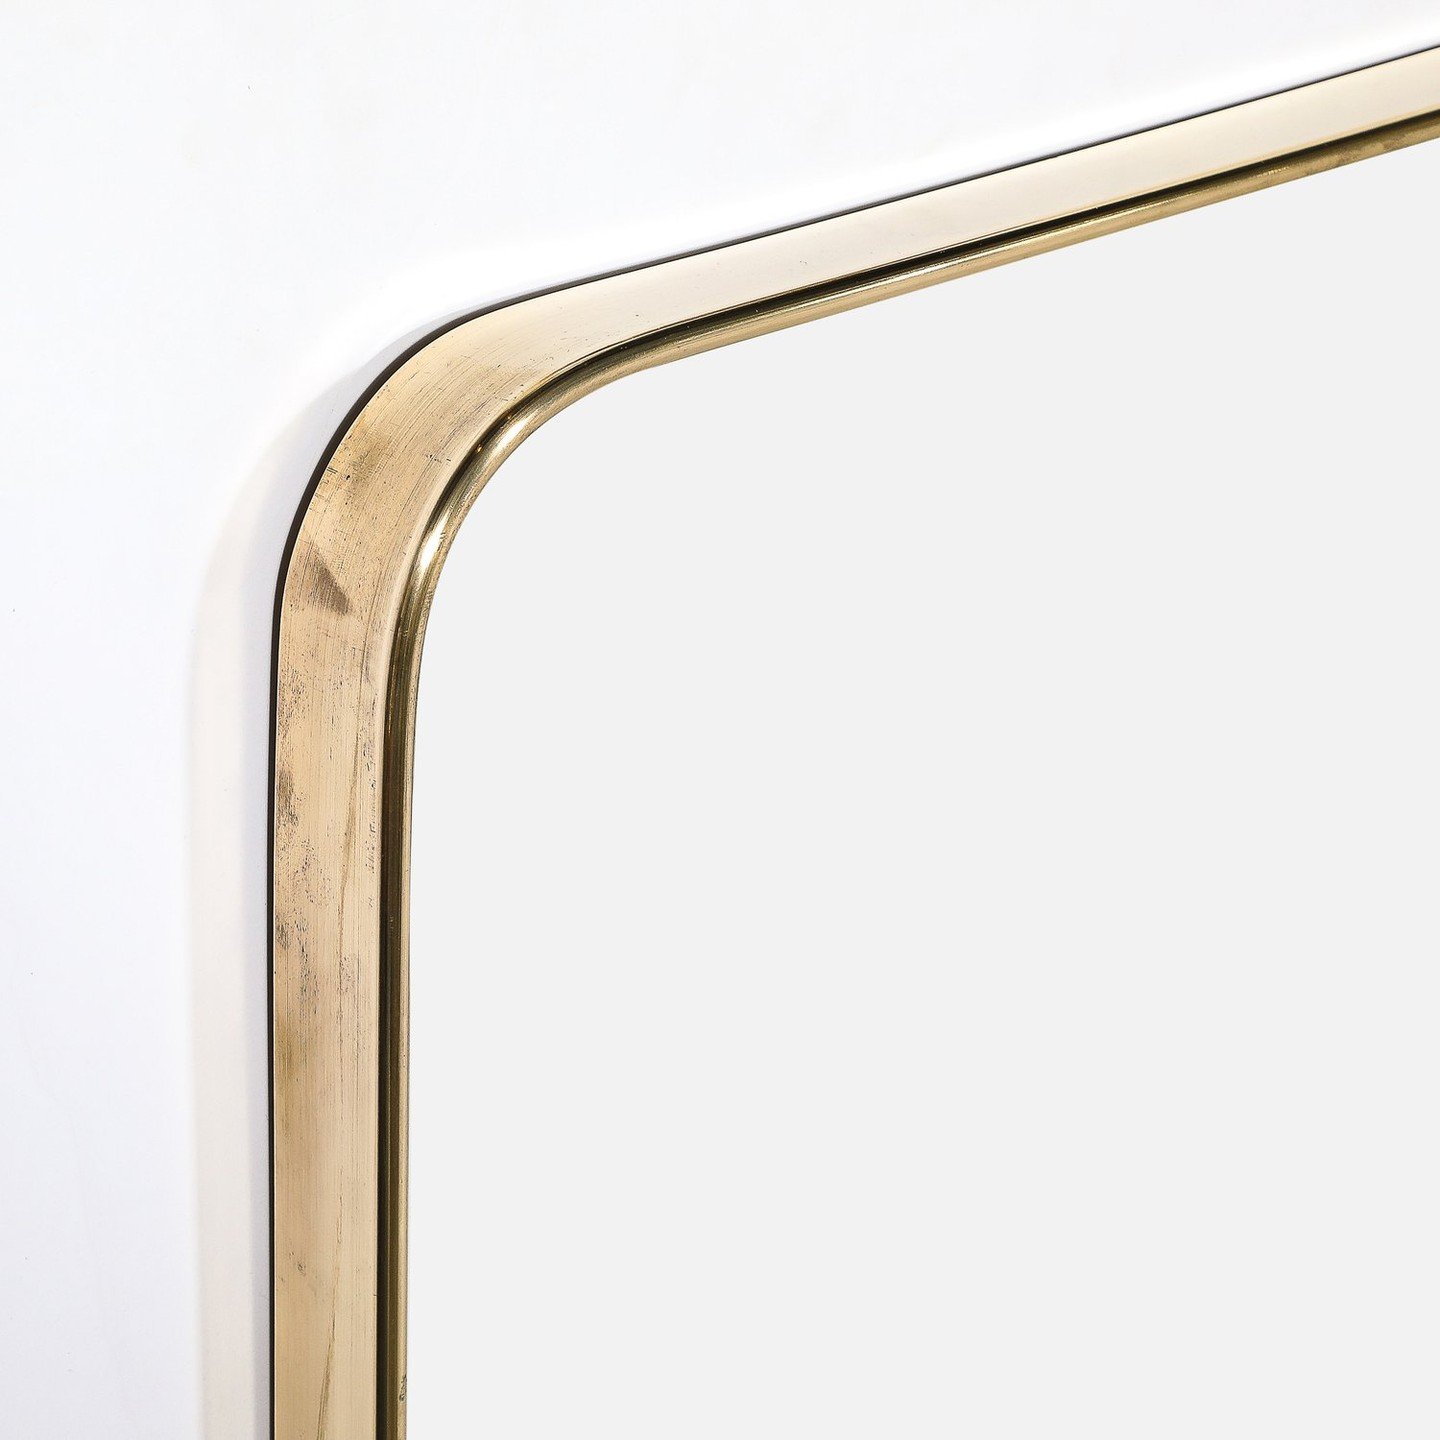 Mid-Century Modernist Rectangular Brass Wrapped Mirror

This beautiful Mid-Century Modernist Rectangular Brass Wrapped Mirror originates from Italy, Circa 1960. It features a rectangular form with subtly rounded shoulders. The lustrous brass frame hu